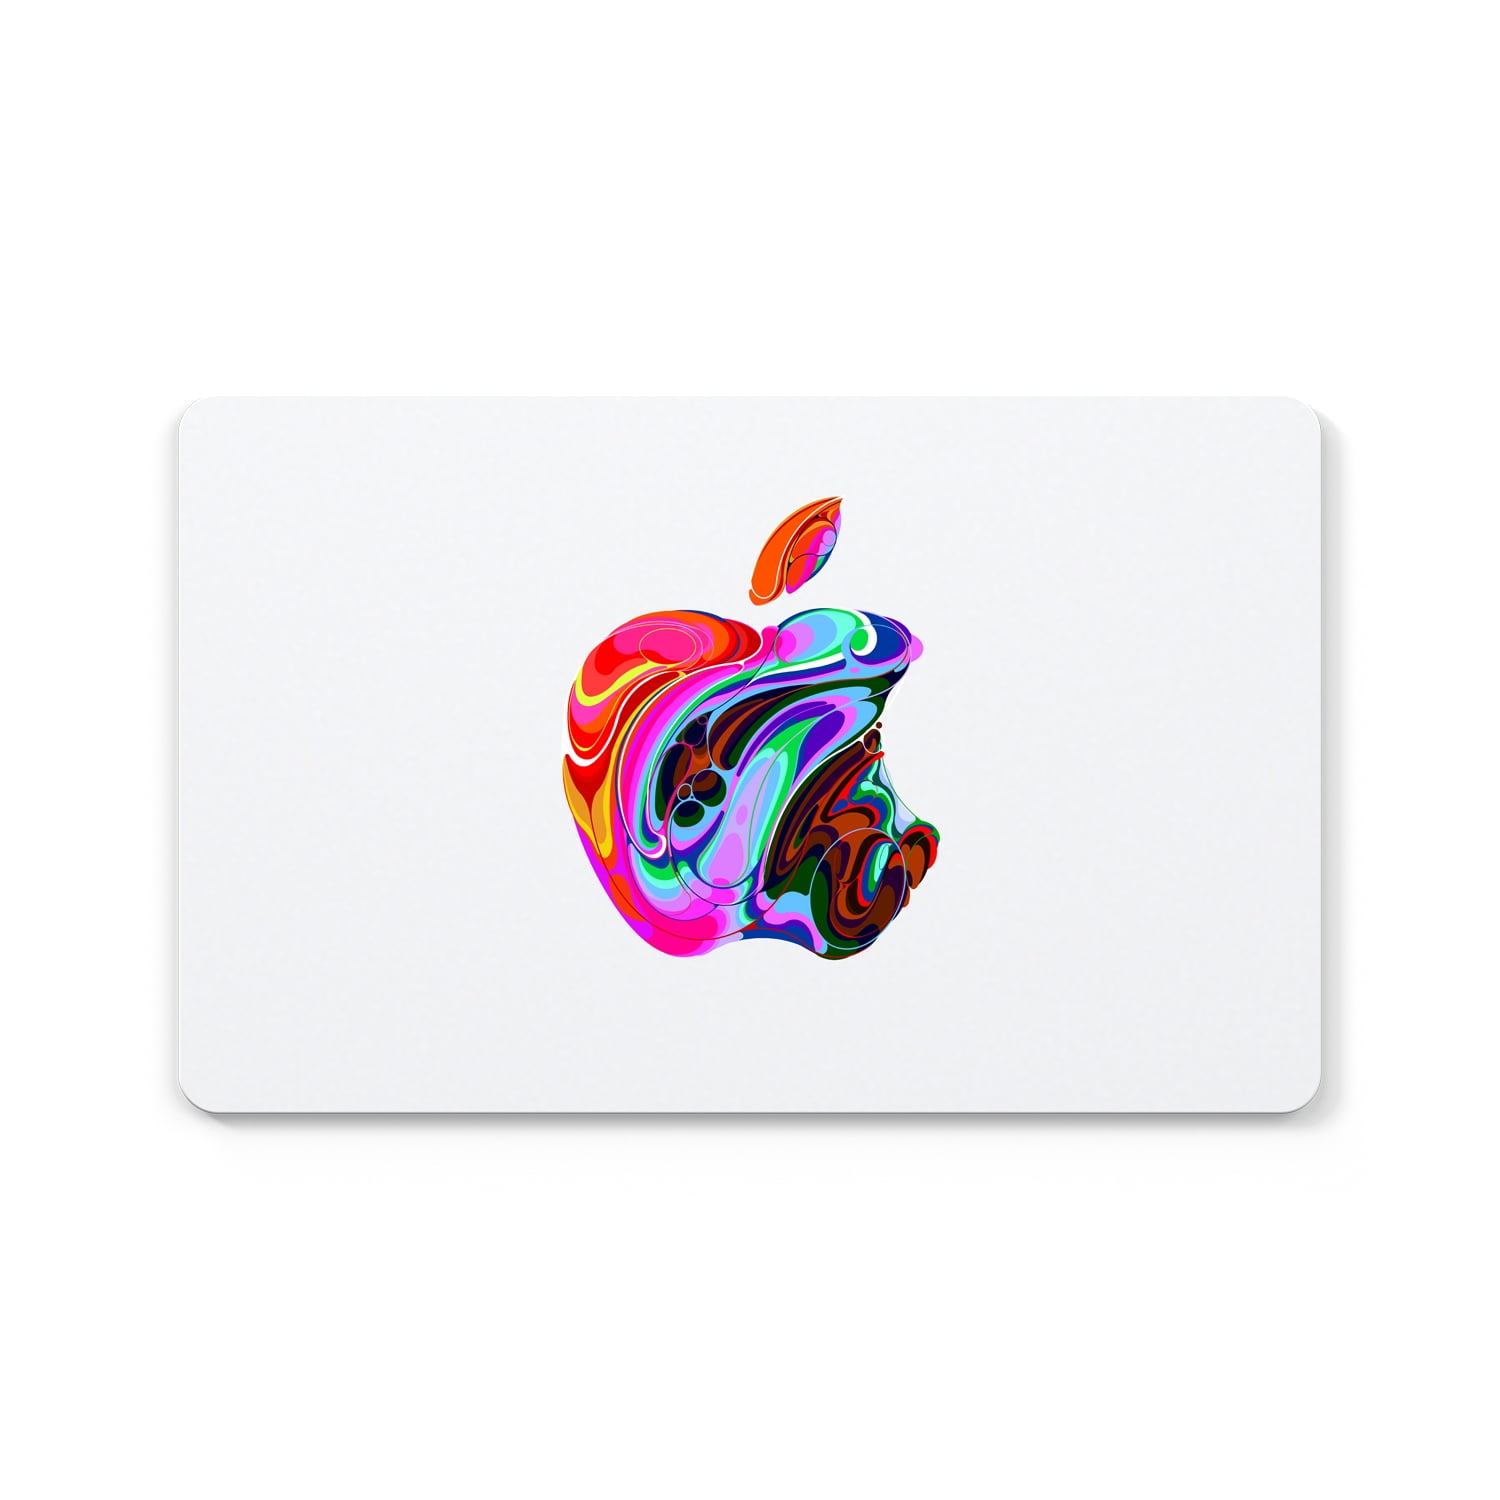 Card (Email Gift Delivery) Apple $100